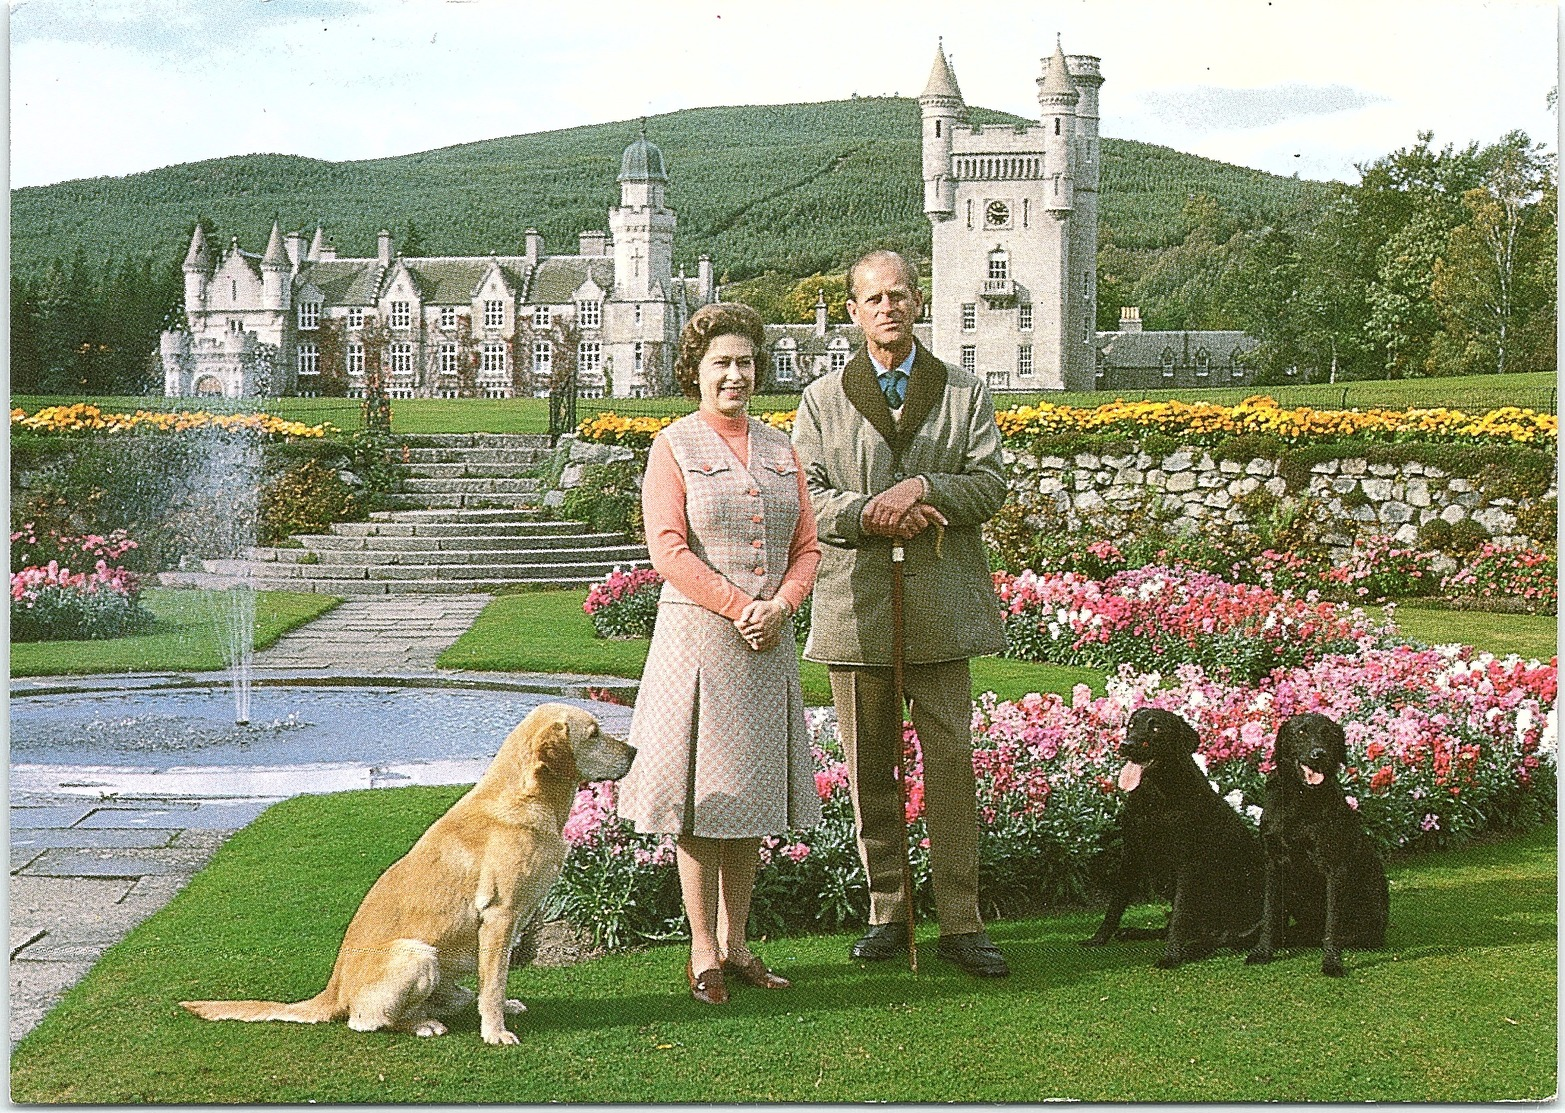 H.M. The Queen And H.R.H. The Duke Of Edinburgh In The Gardens Of Balmoral Castle - Familles Royales